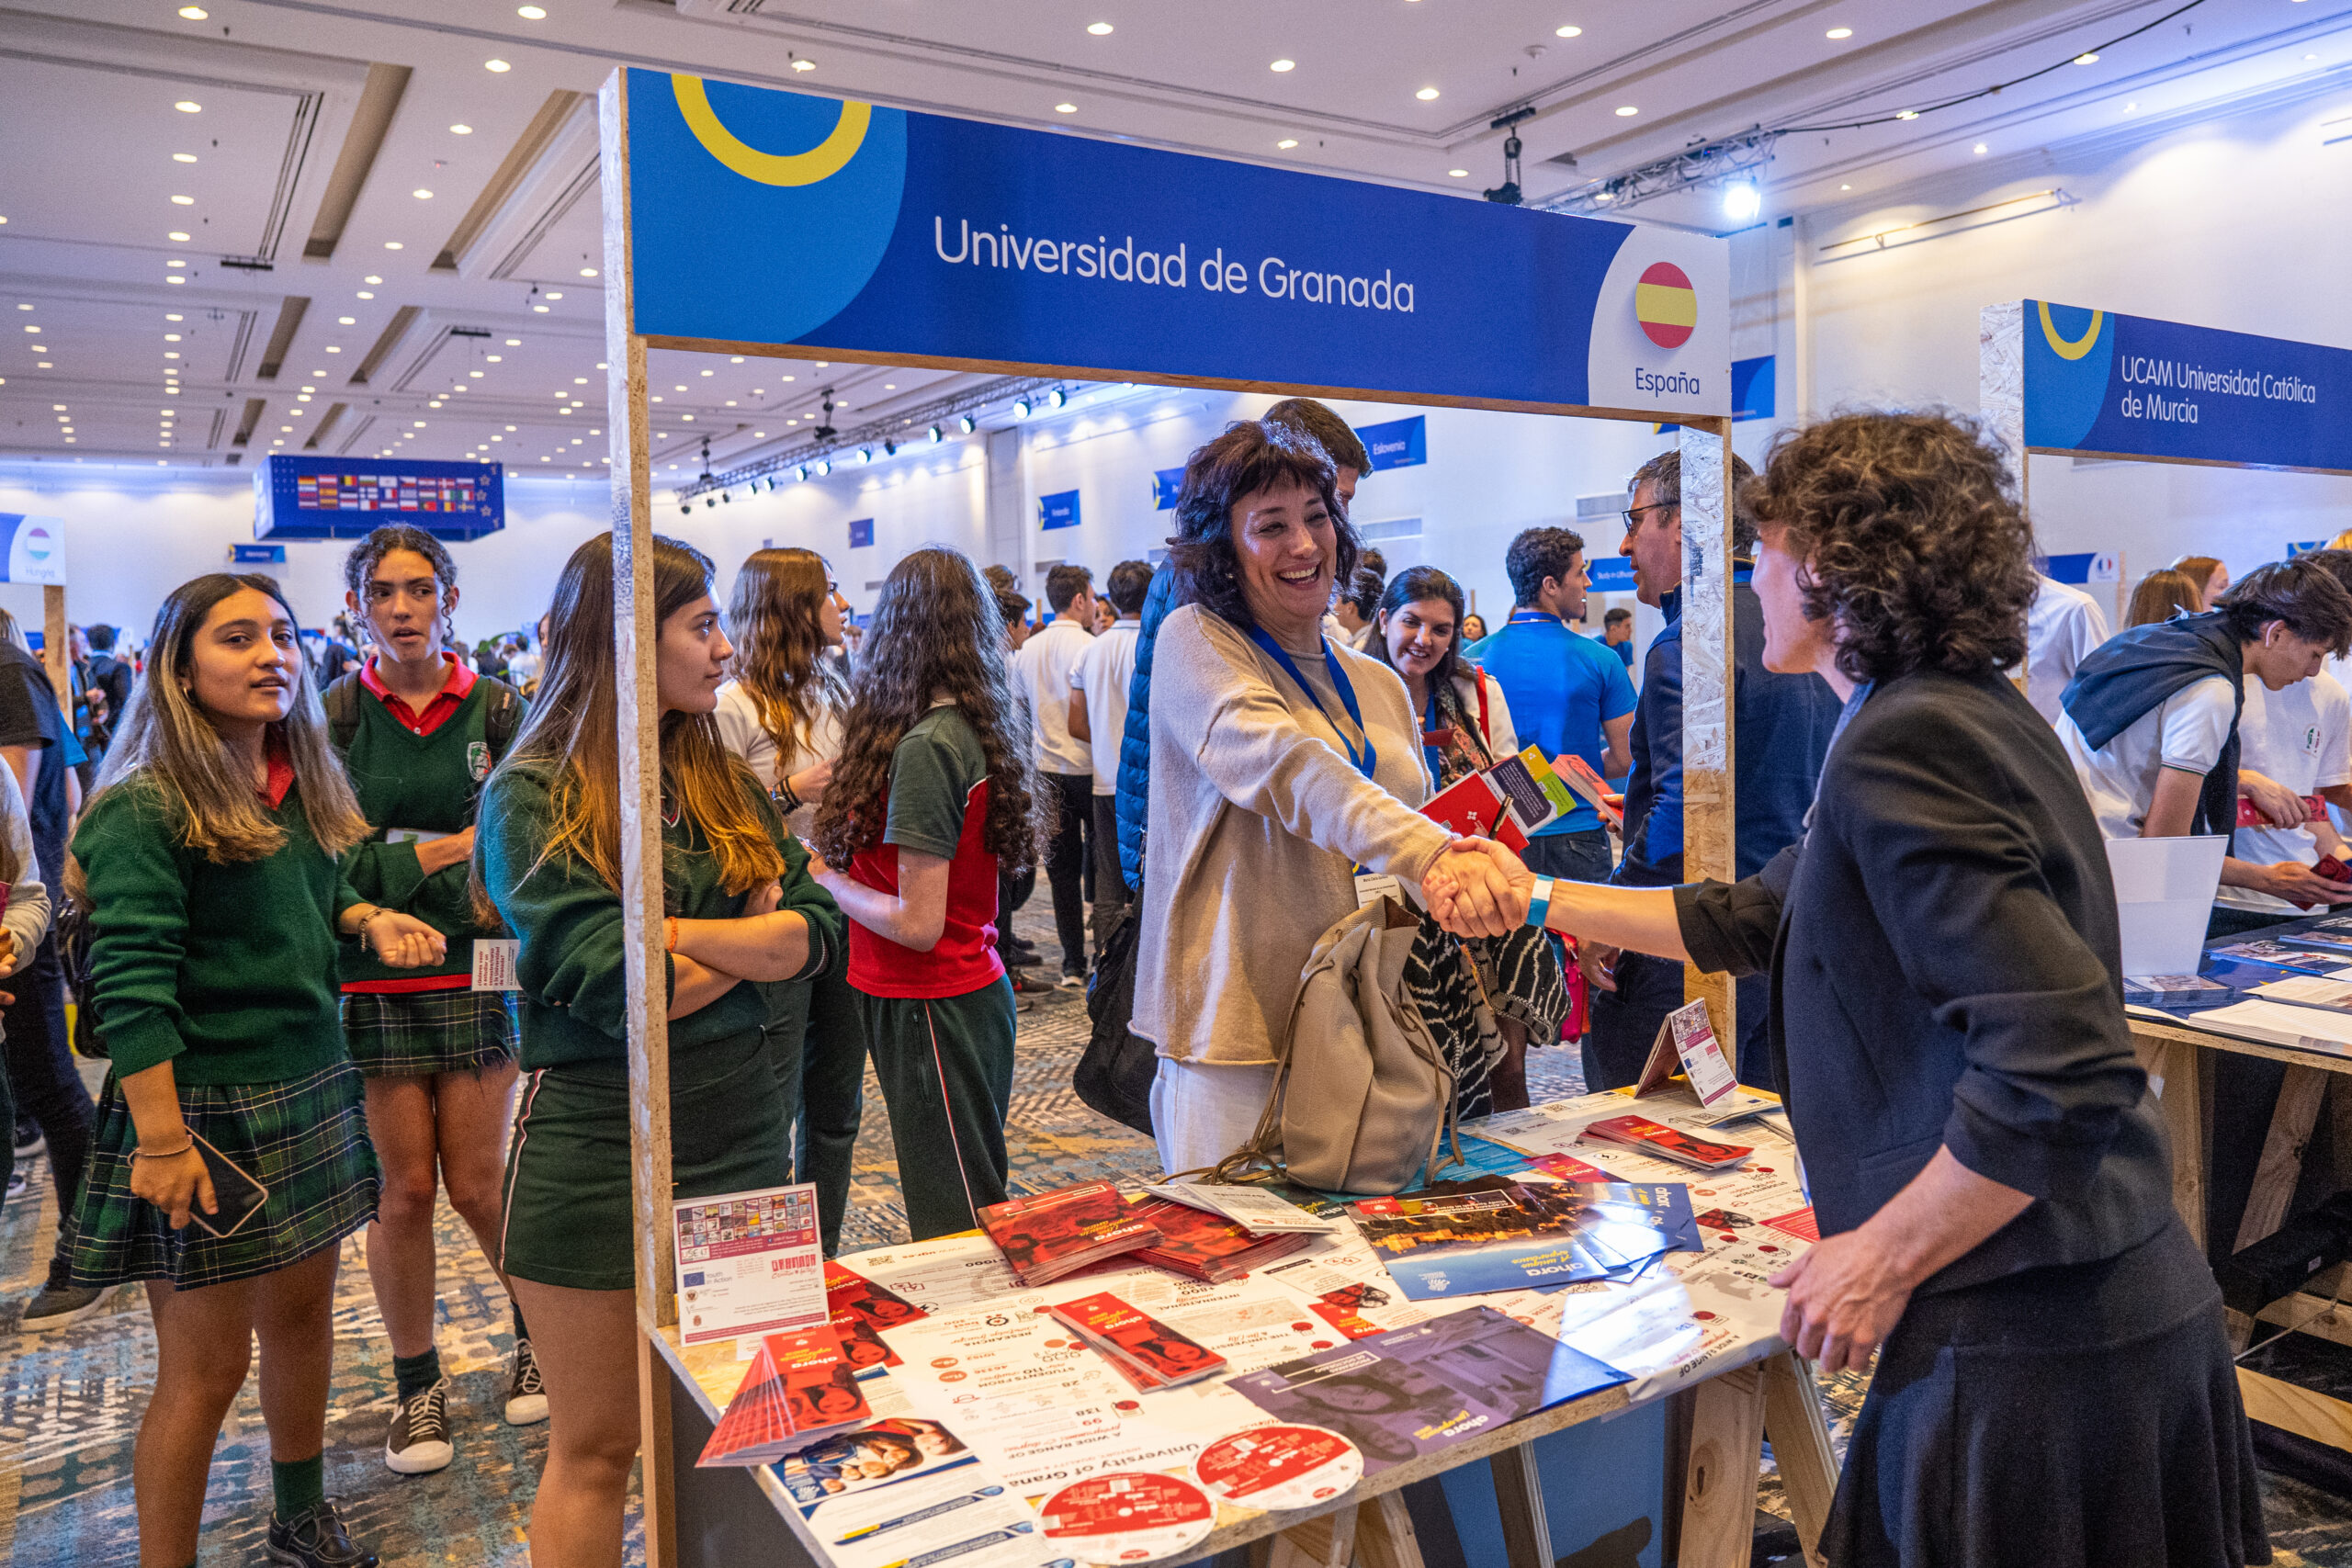 Argentine students discover international opportunities at ‘Study in Europe’ fair